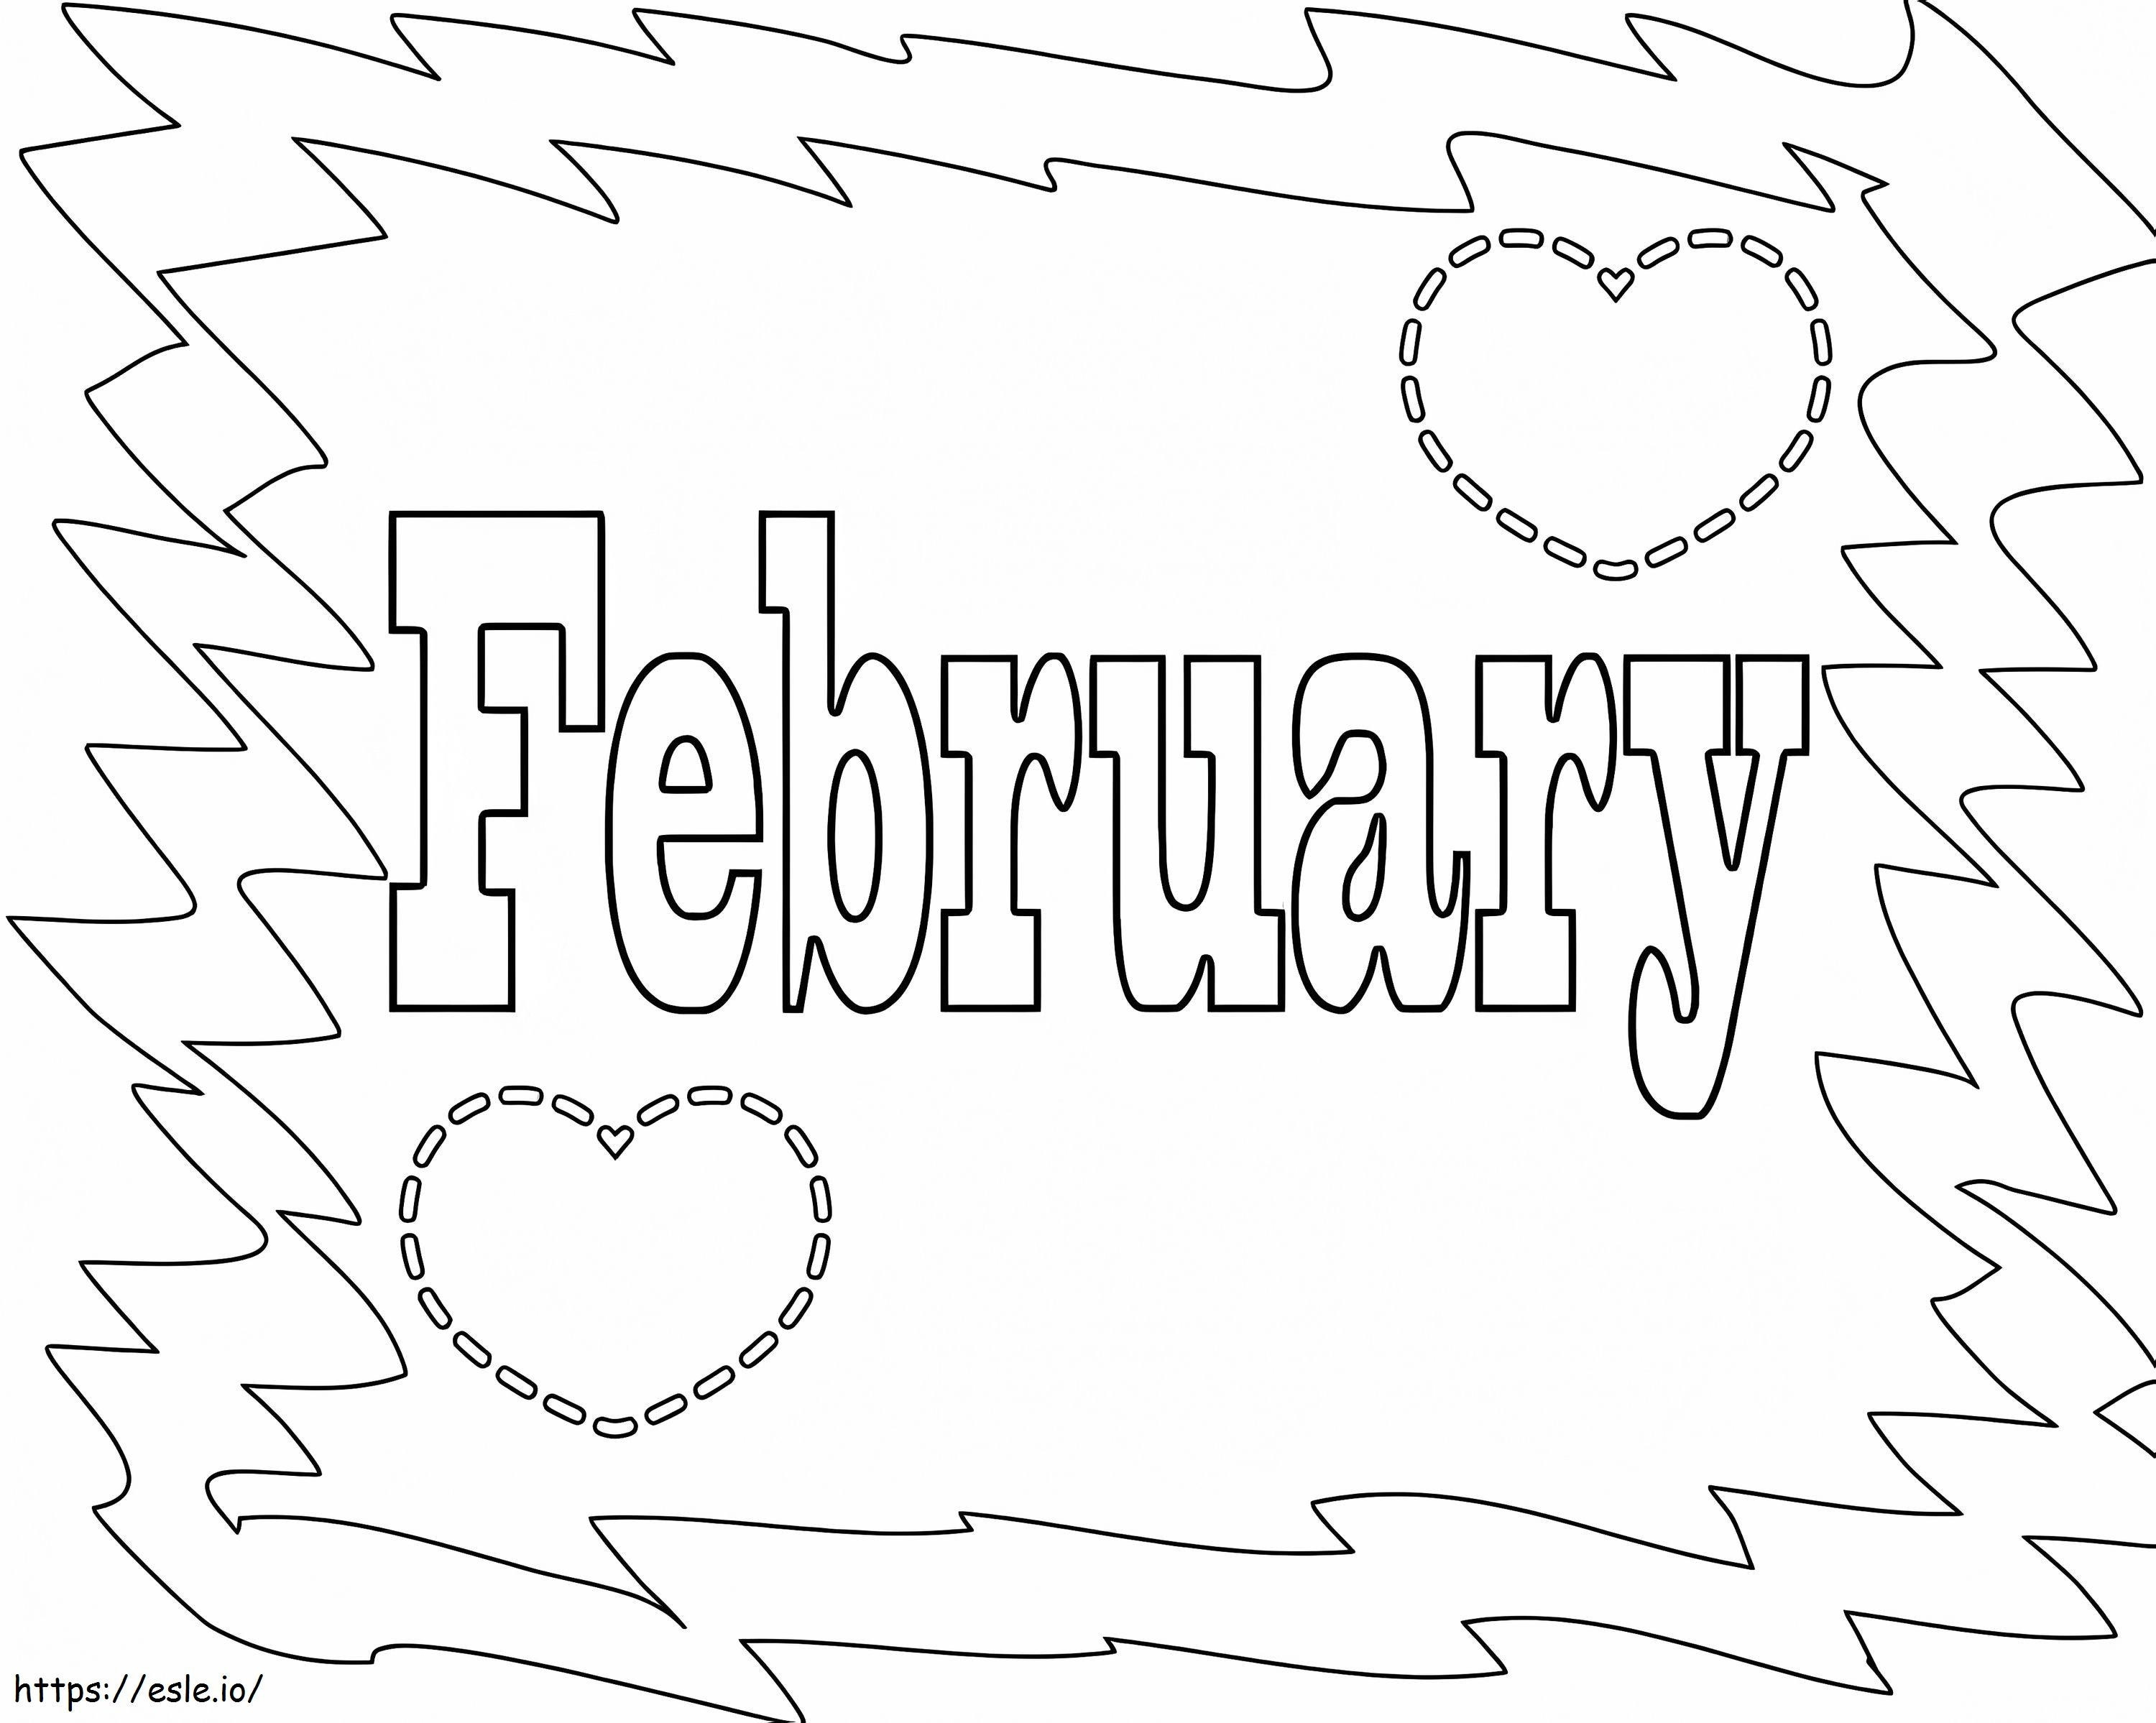 Feb. 10 coloring page